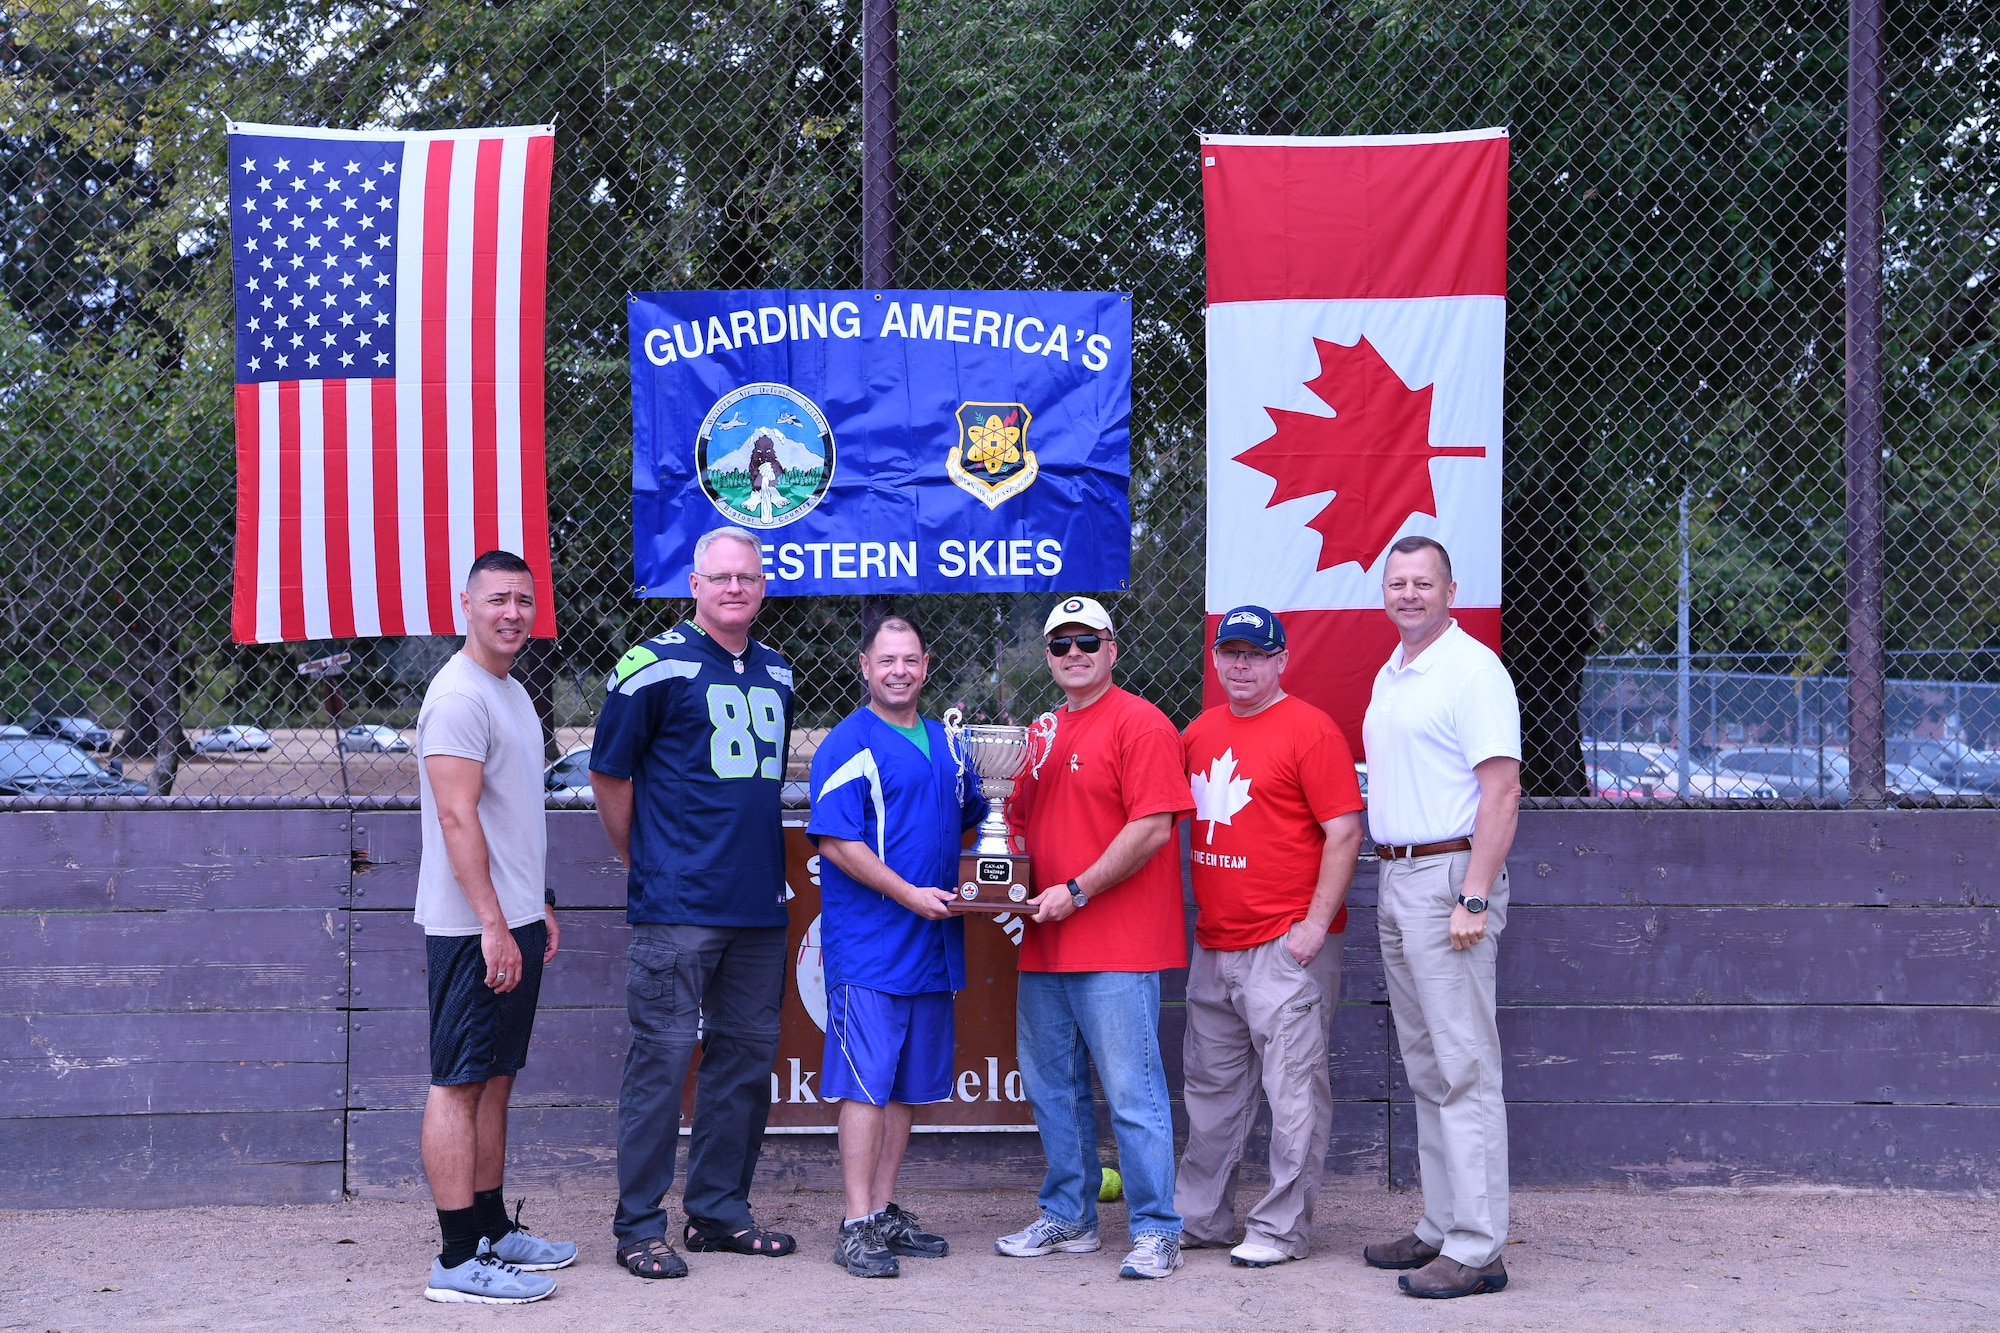 The Western Air Defense Sector’s CAN-AM Challenge Cup was officially passed from Canadian Detachment commander, Lt. Col. Matthew Wappler, to Chief Master Sgt. Daniel Rebstock, 225th Support Squadron superintendent, after the U.S. won the annual softball game by a final score of 22 to 7.  Pictured from left to right are: Chief Master Sgt. Allan Lawson, Col. William Krueger, Chief Master Sgt. Daniel Rebstock, Canadian Lt. Col. Matthew Wappler, Canadian Warrant Officer Richard Martin, and Col. Gregor Leist. (U.S. Air National Guard photo by Capt. Kimberly D. Burke)